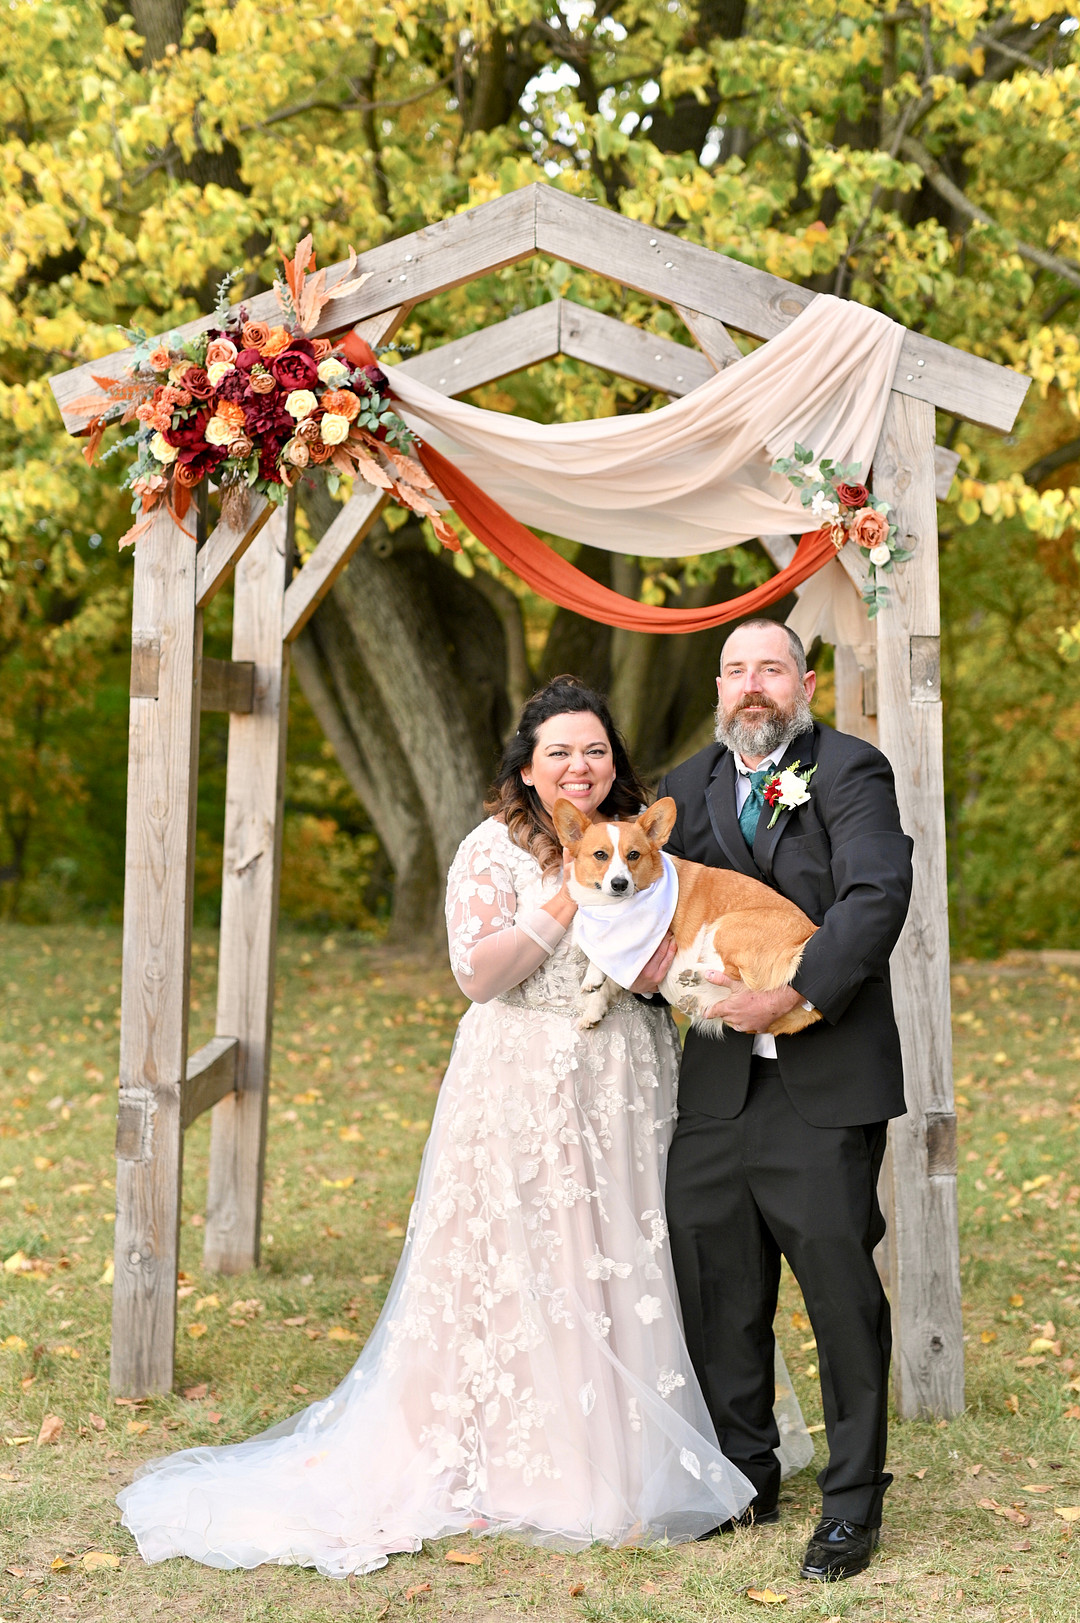 Halloween Themed Wedding At An Orchard 77